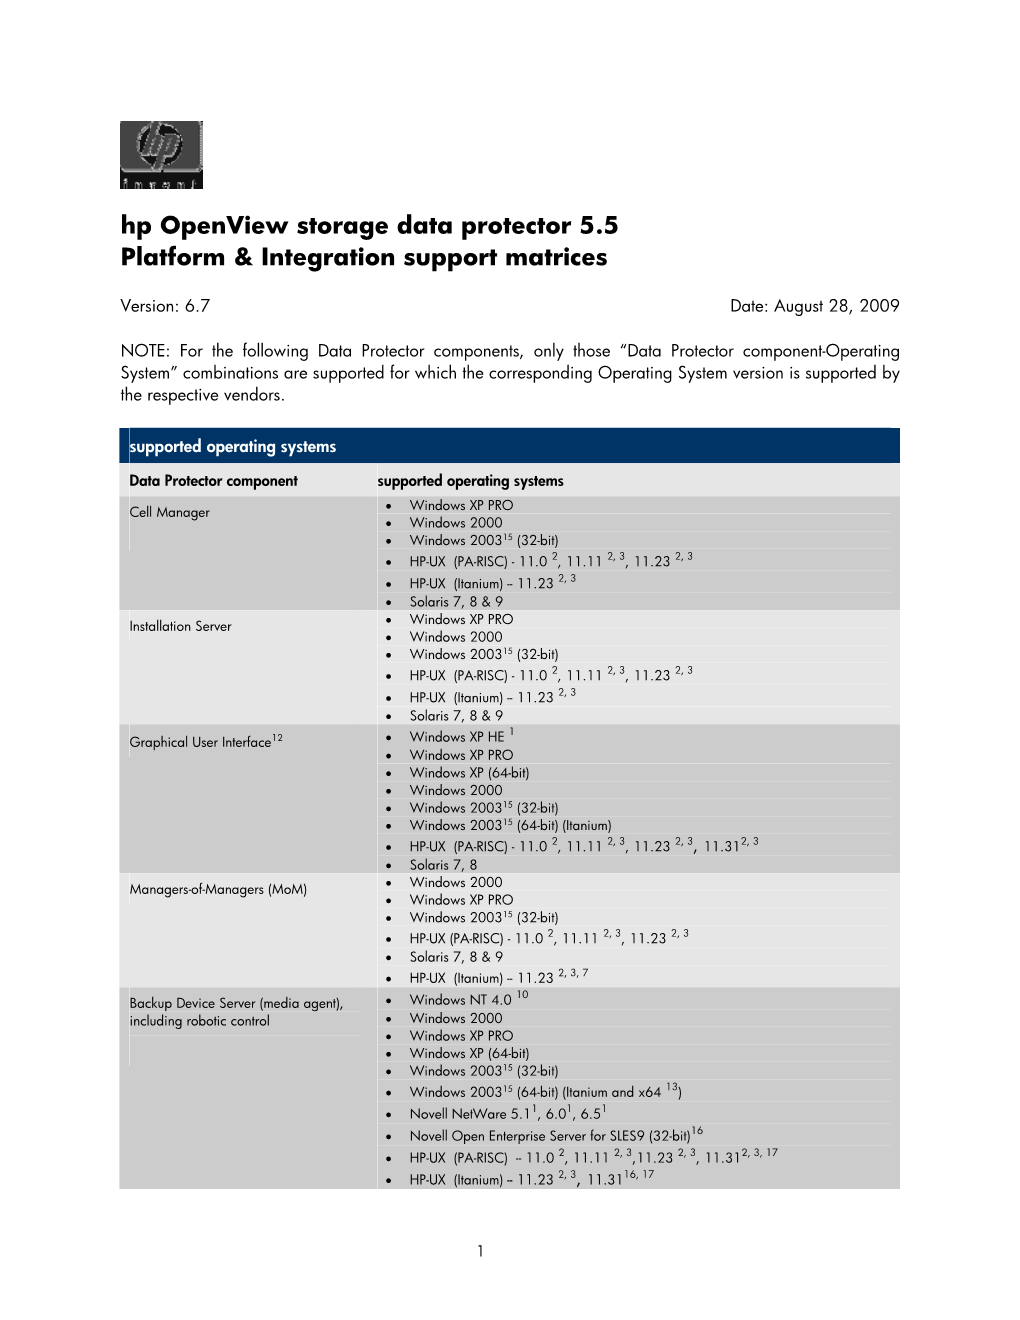 Hp Openview Storage Data Protector 5.5 Platform & Integration Support